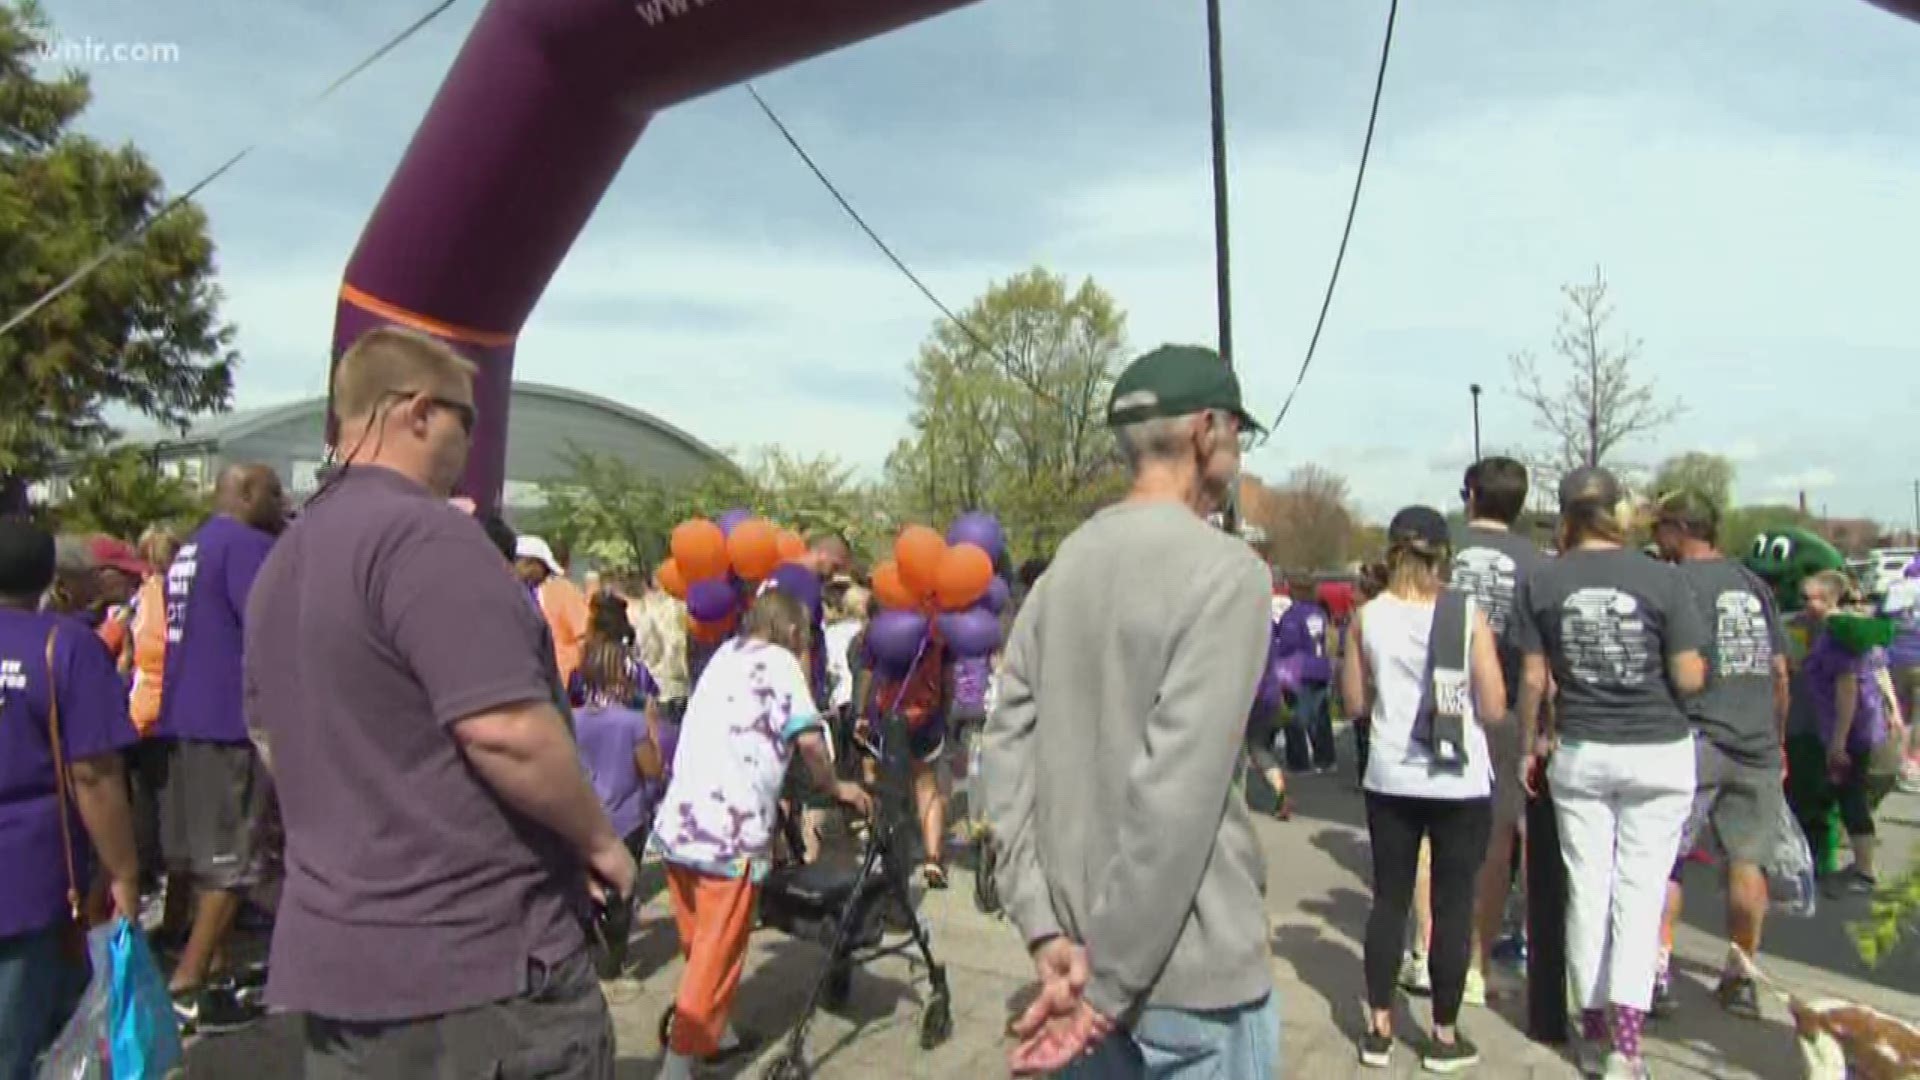 Hundreds of people walked to end Alzheimer's Saturday at UT Gardens for the Alzheimer's Tennessee Knoxville walk.